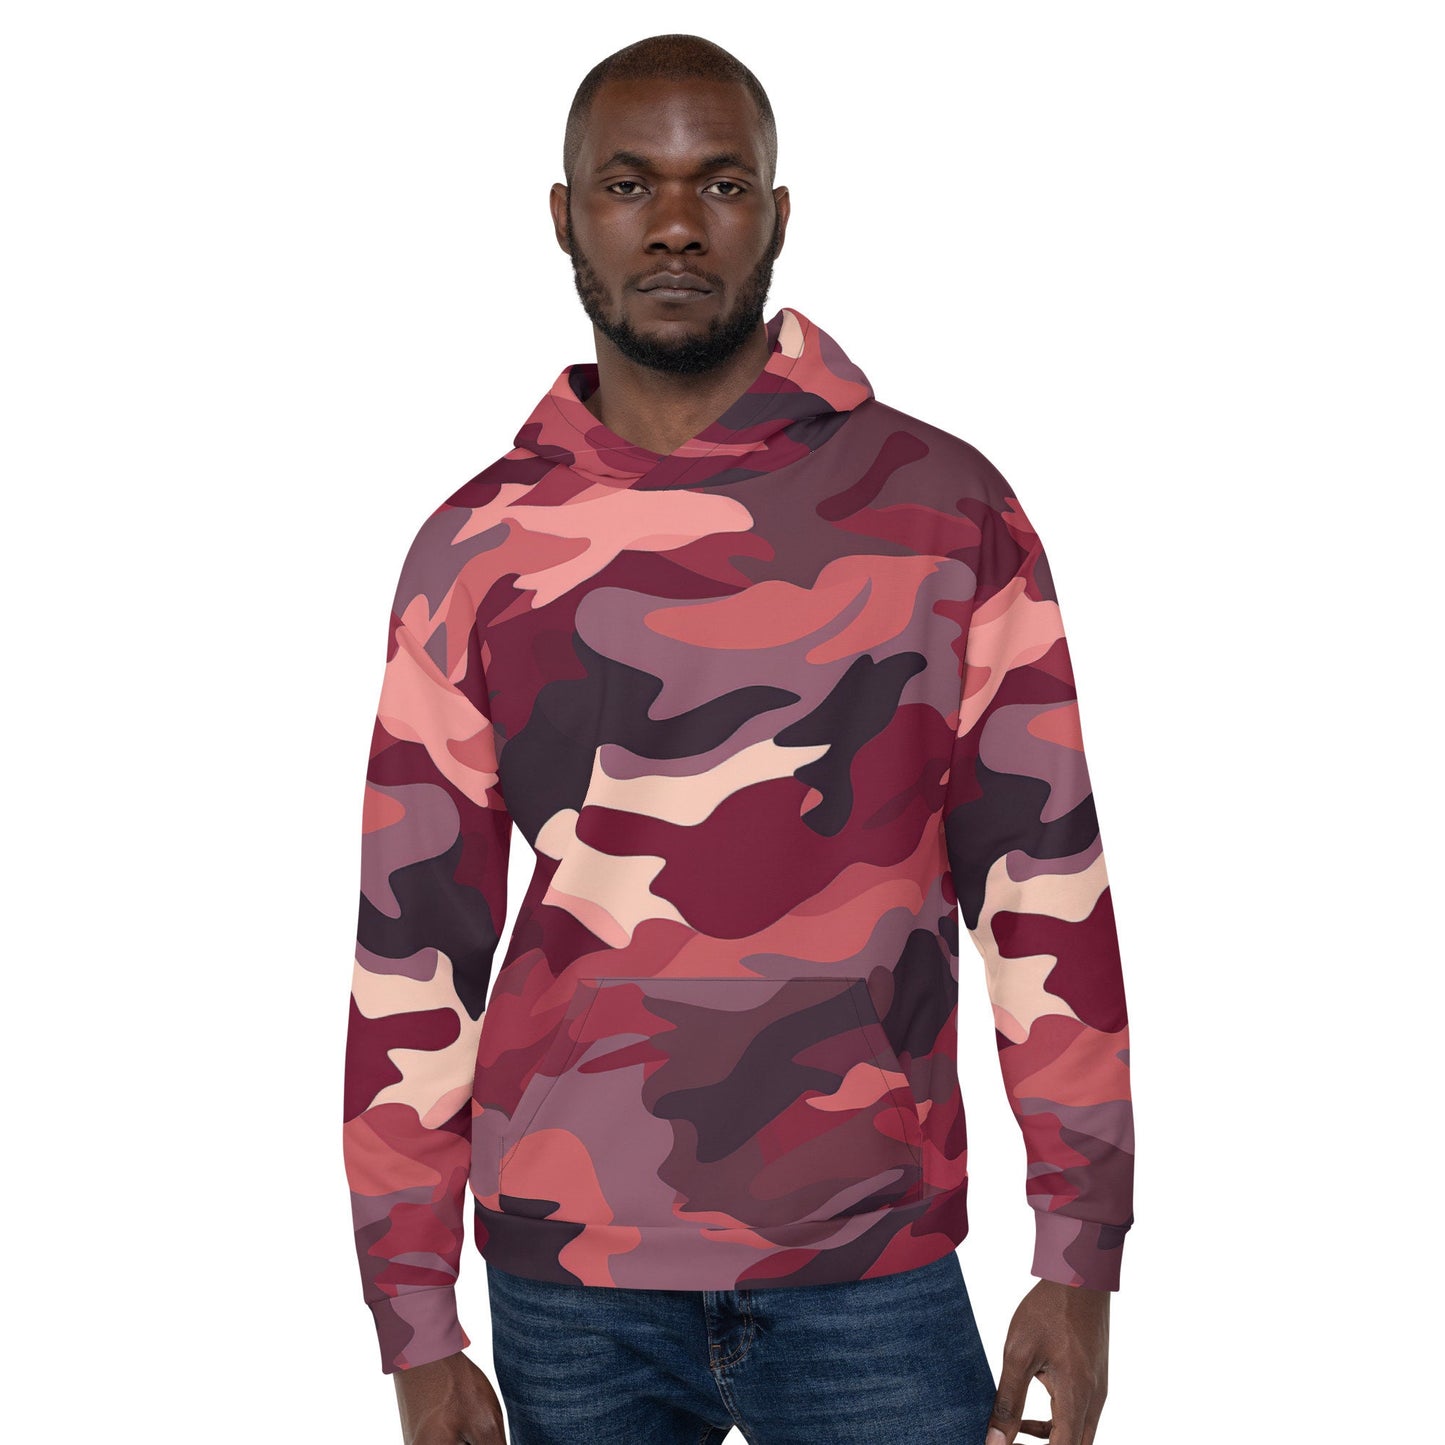 Funky Tiger® Camouflage Hoodie in Crimson/Maroon/Burgundy For Gameday| Sports | Events | Party | Everyday| Crimson | Maroon,Fall